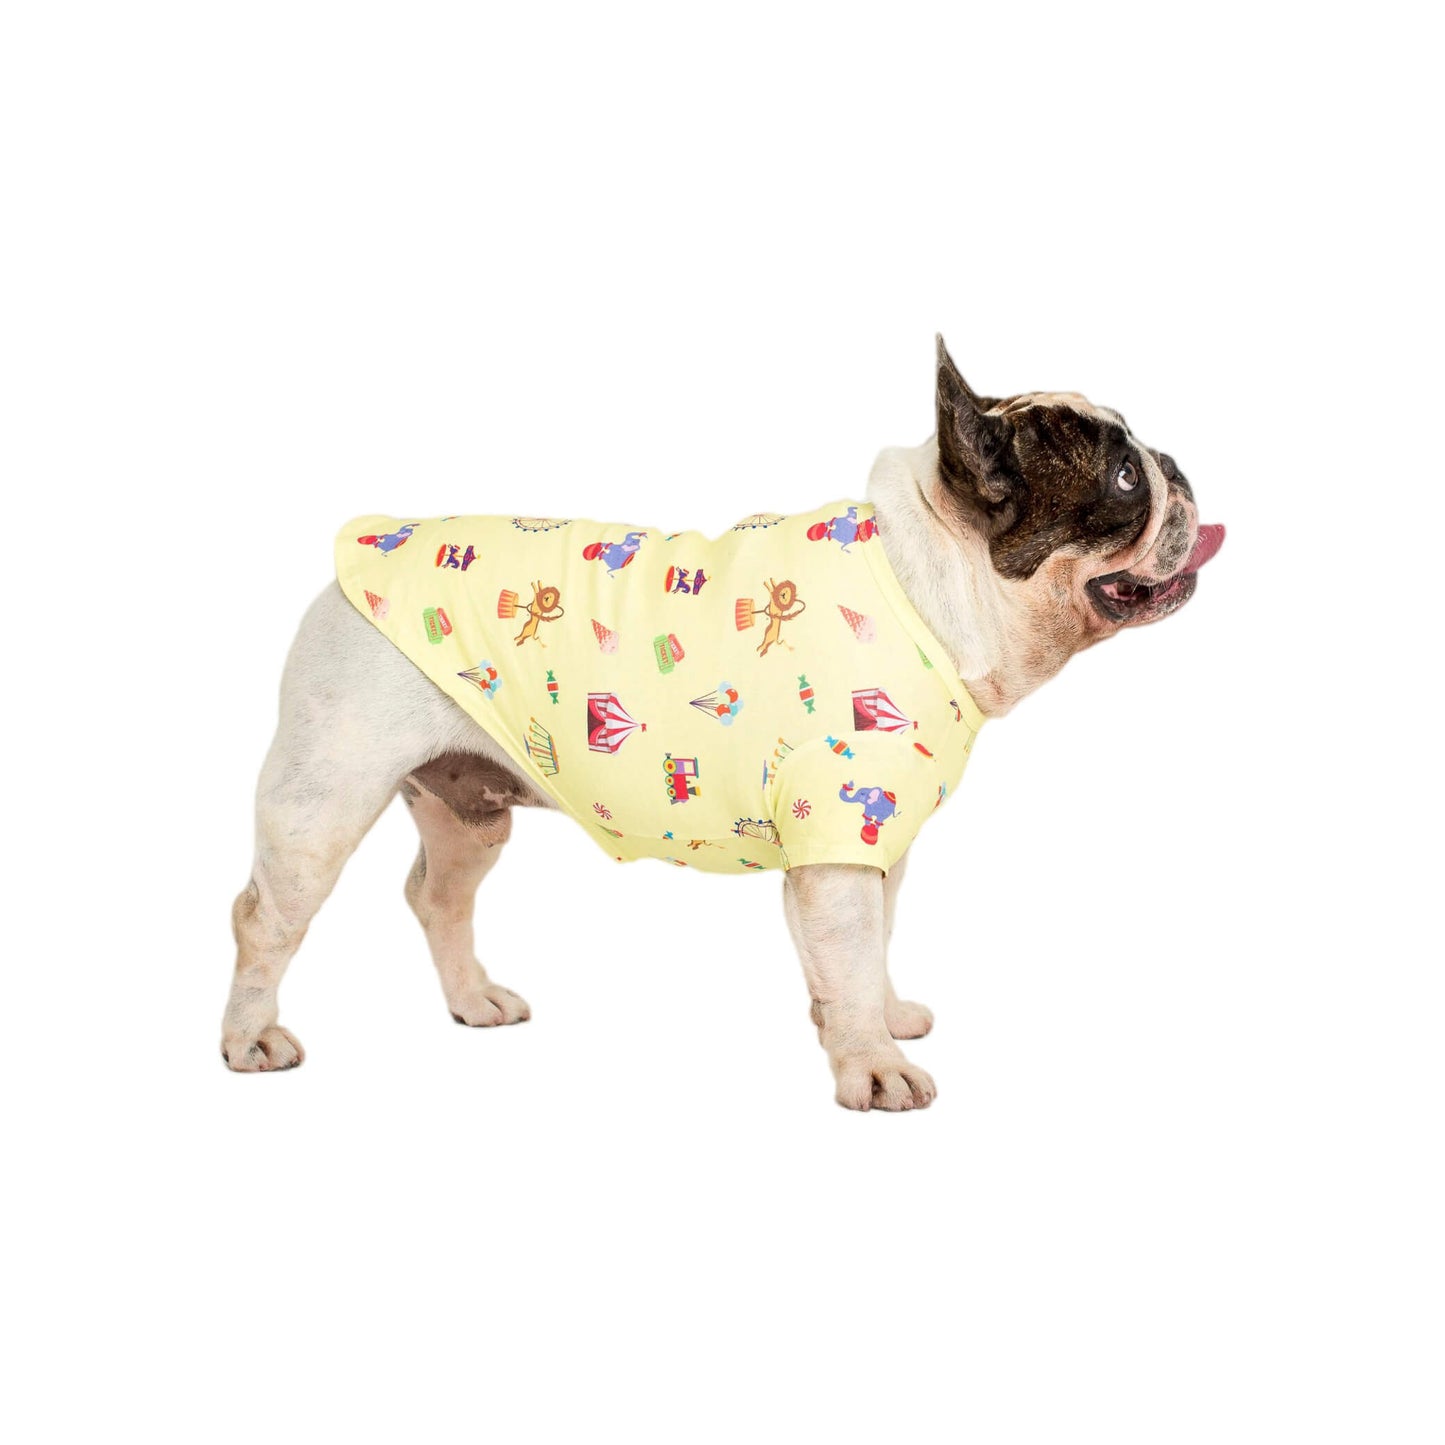 Chester the French Bulldog lstanding up side on wearing a Vibrant Hound Admit one dog shirt. It has carnival theme printed on the dog clothing.